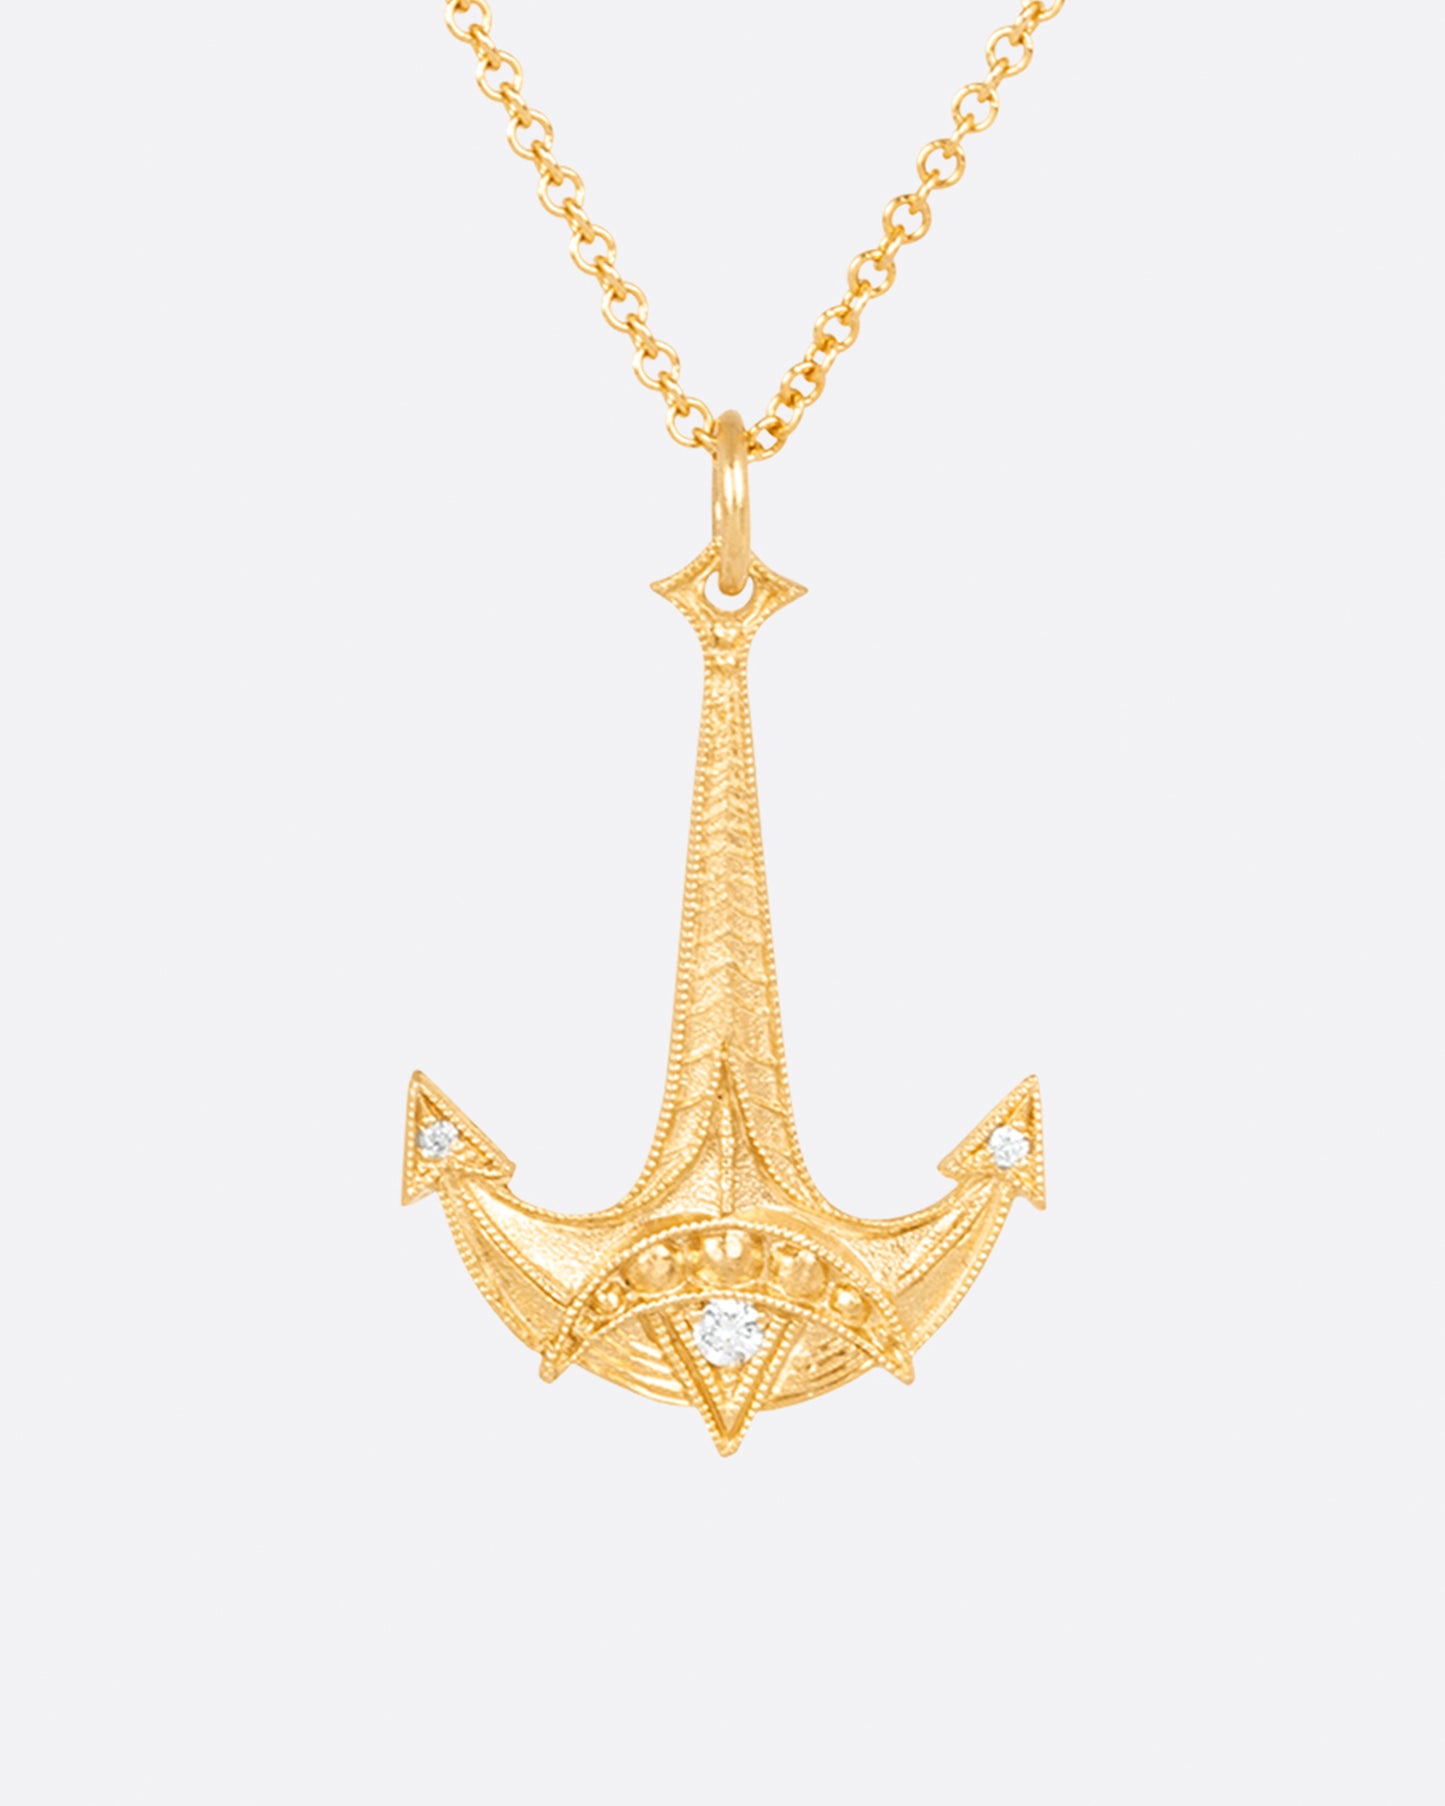 This diamond-dotted Jonah's Anchor necklace symbolizes hope and redemption